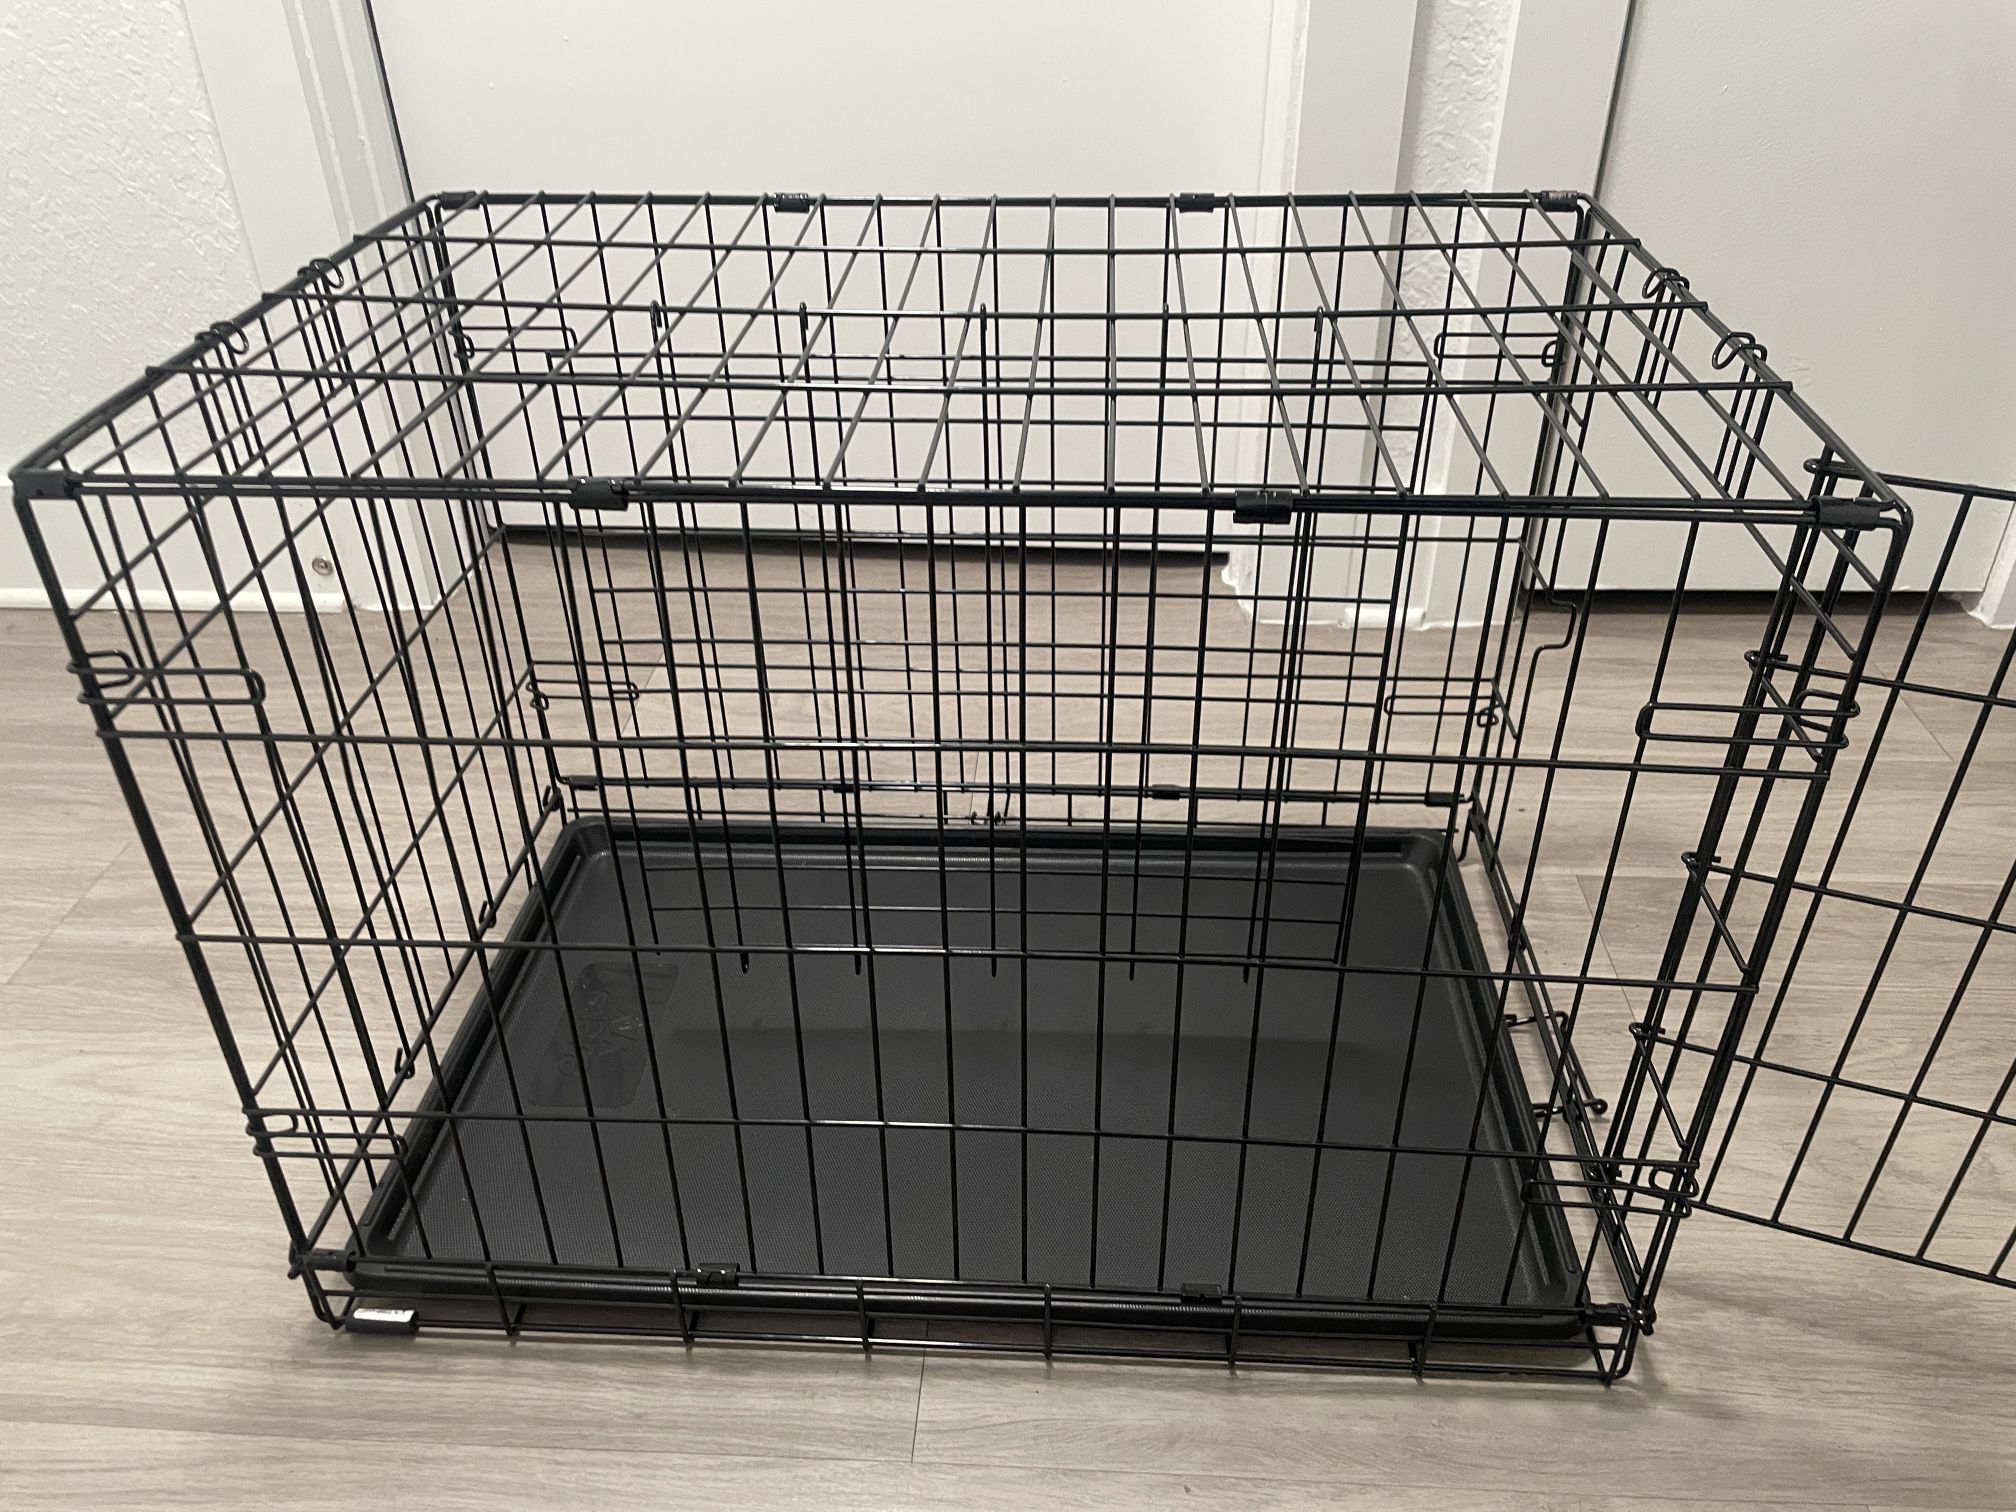 Everyyay Medium Sized Dog Crate With Divider